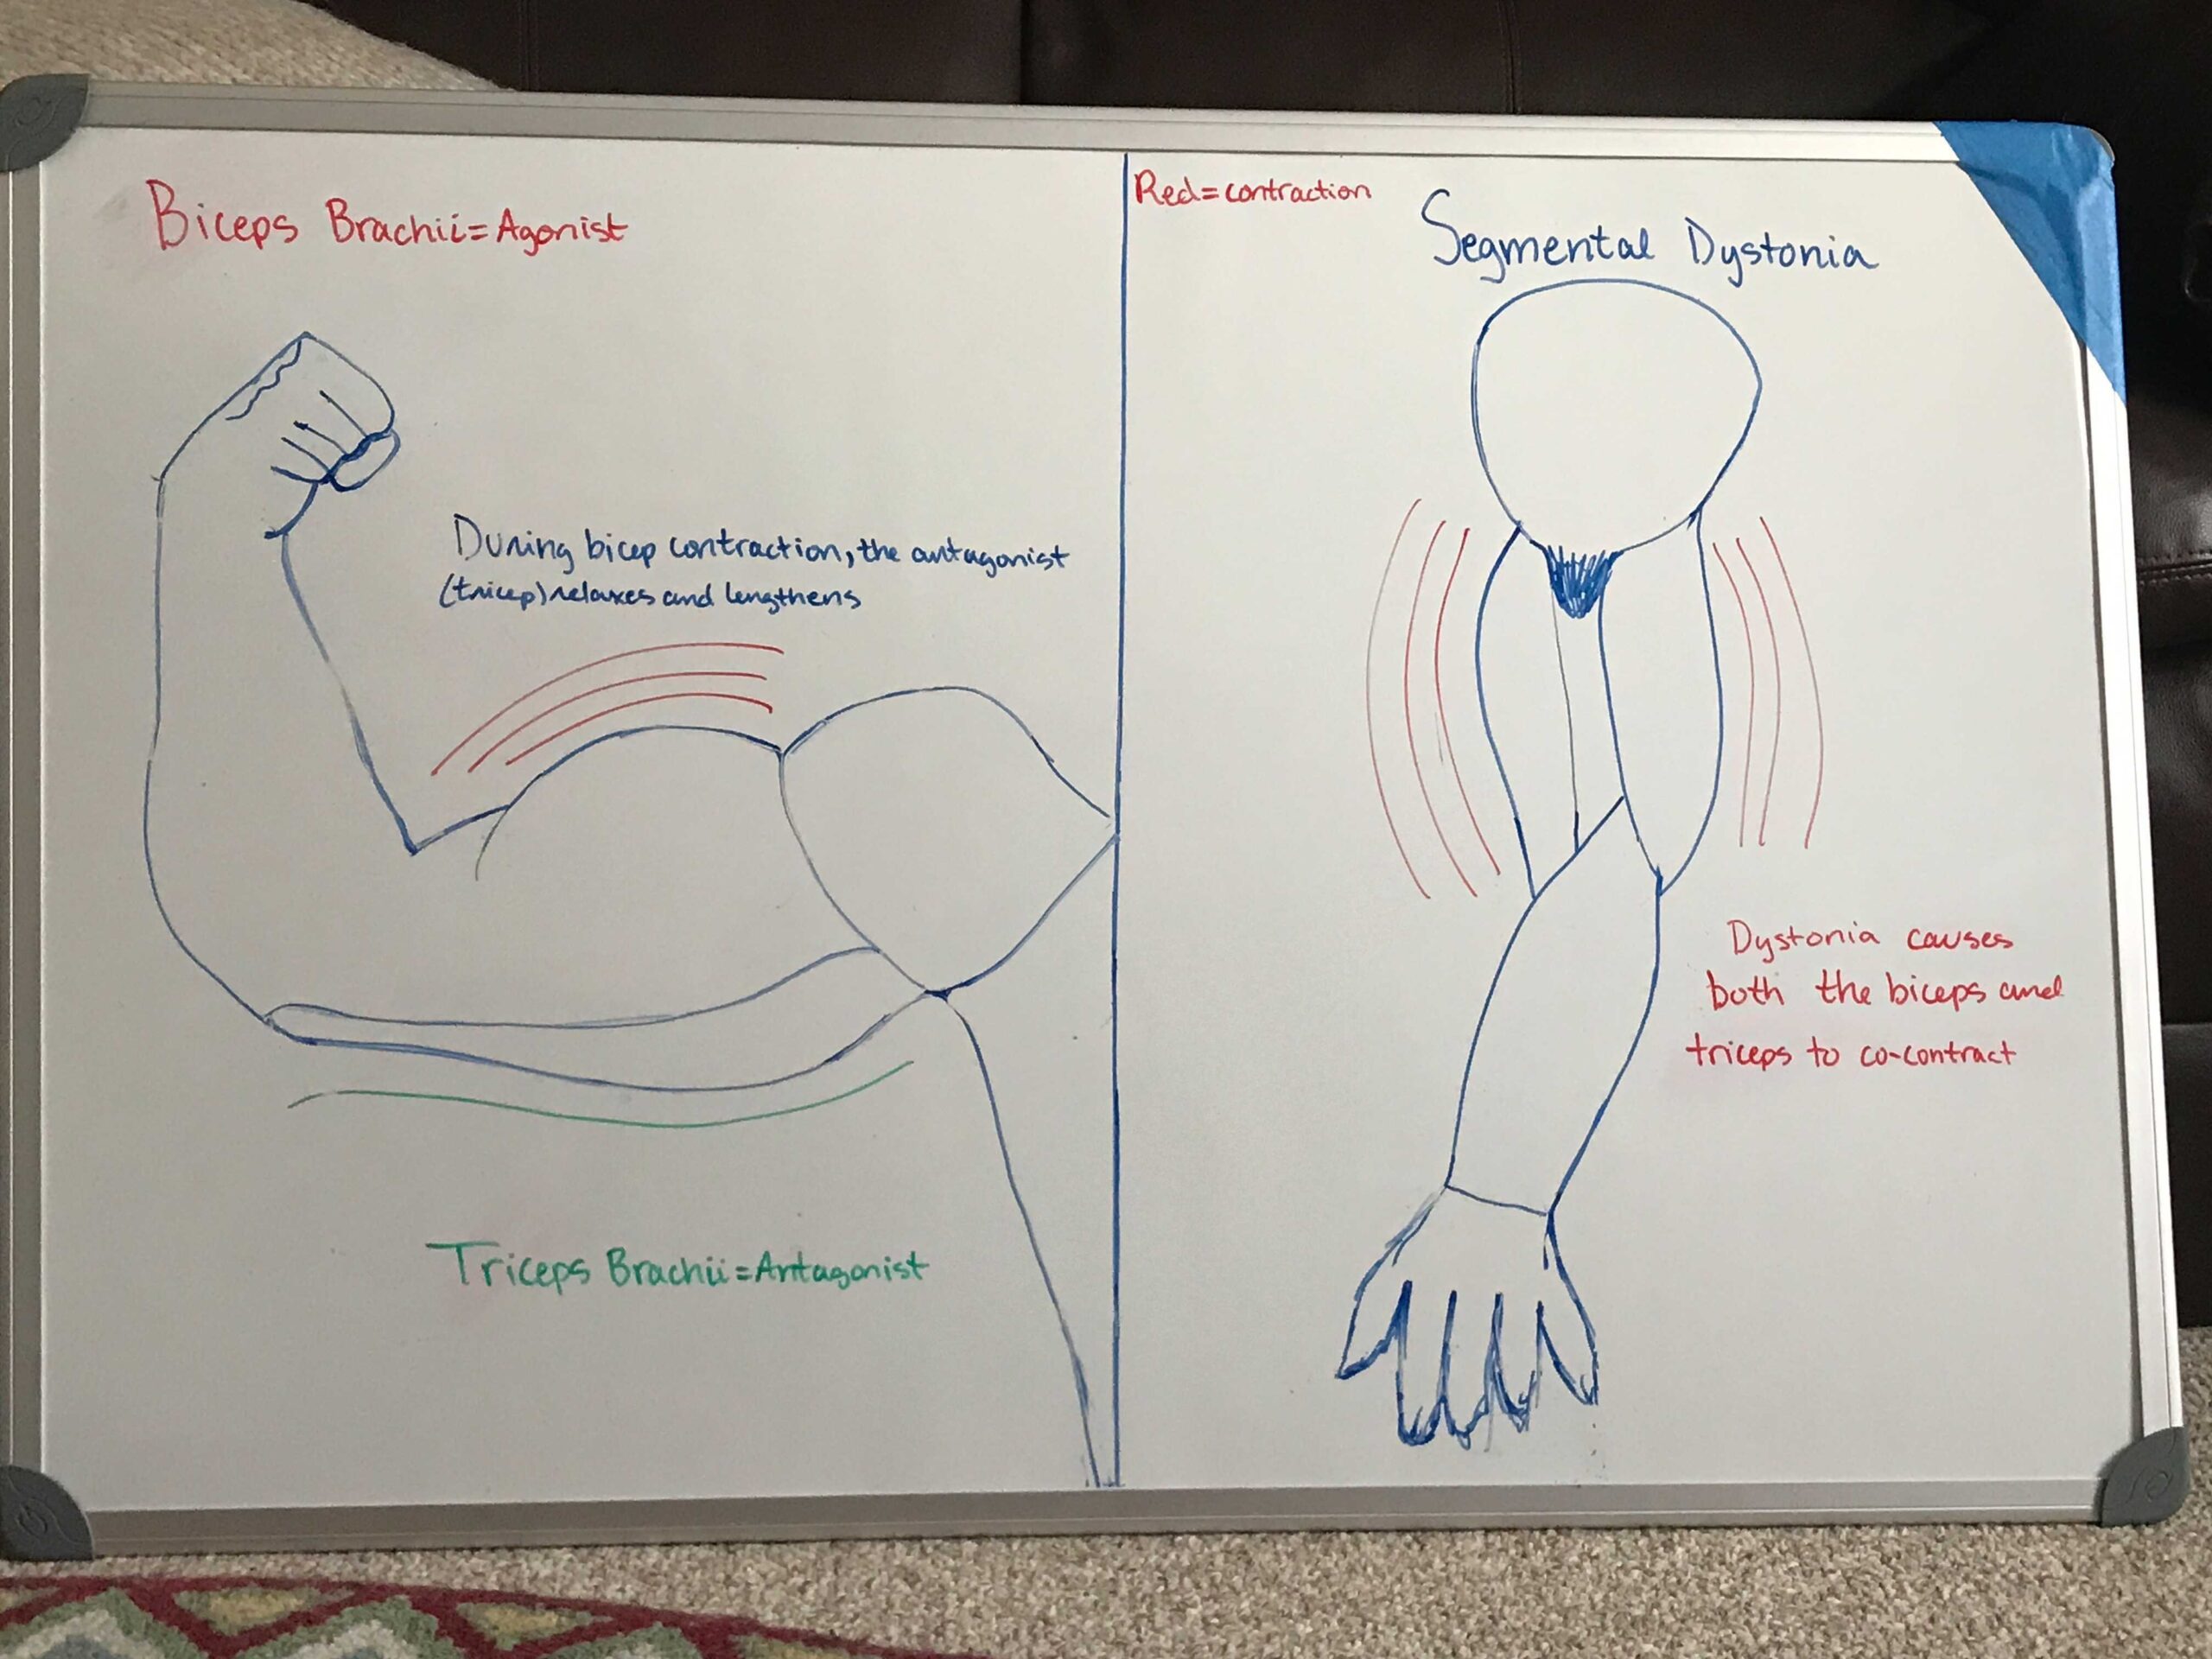 Dystonia compared to normal muscle contraction